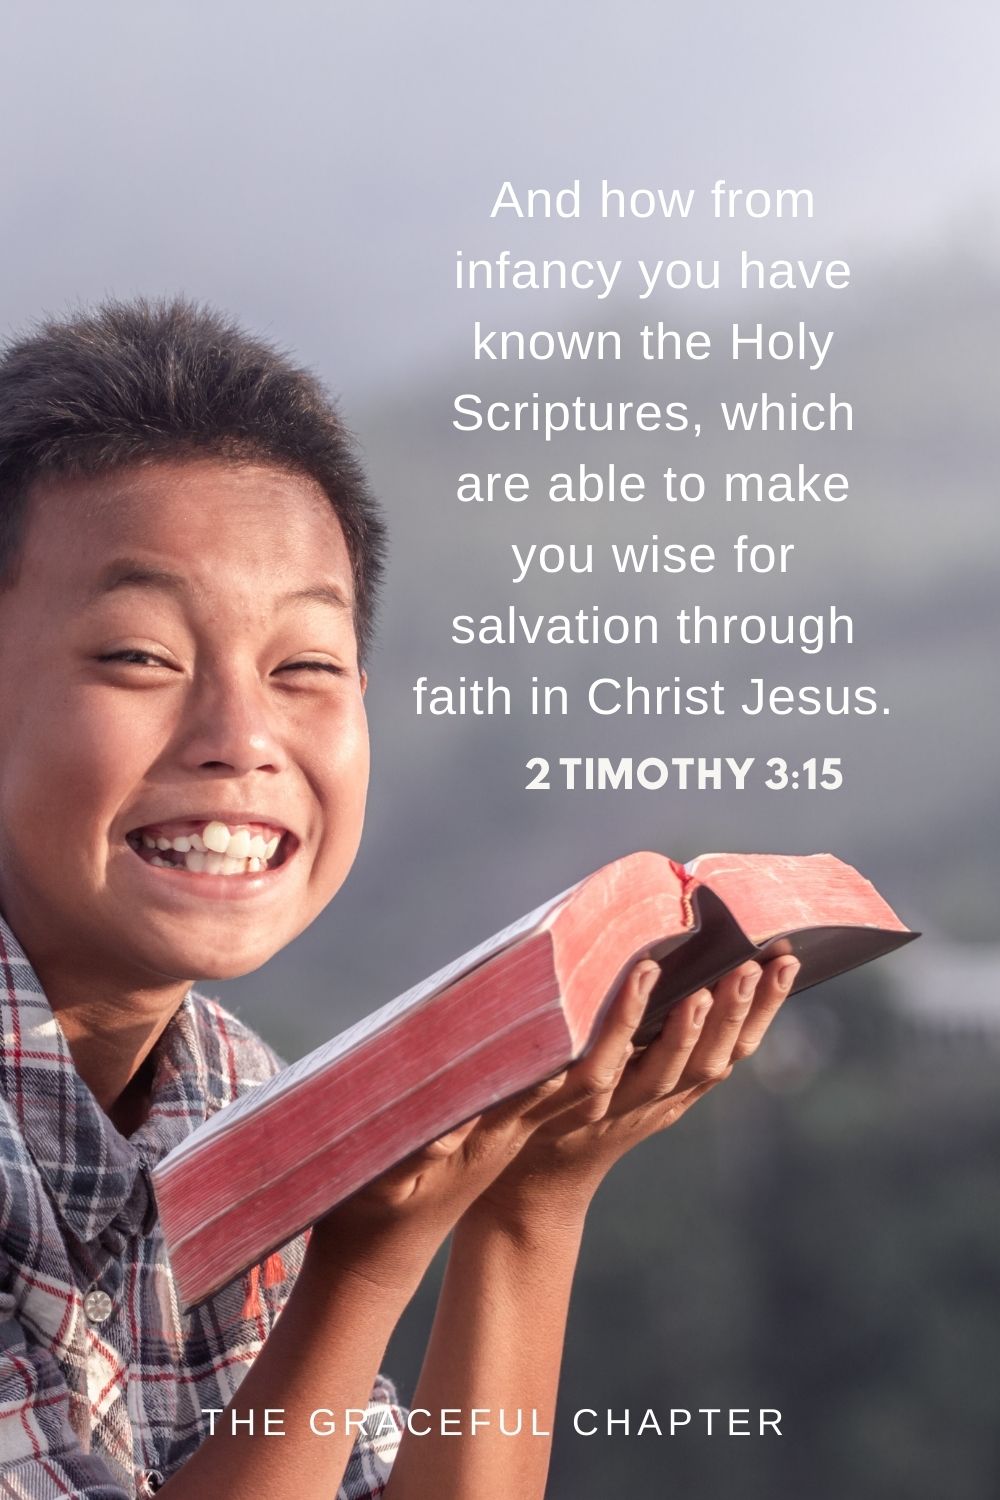 And how from infancy you have known the Holy Scriptures, which are able to make you wise for salvation through faith in Christ Jesus. 2 Timothy 3:15